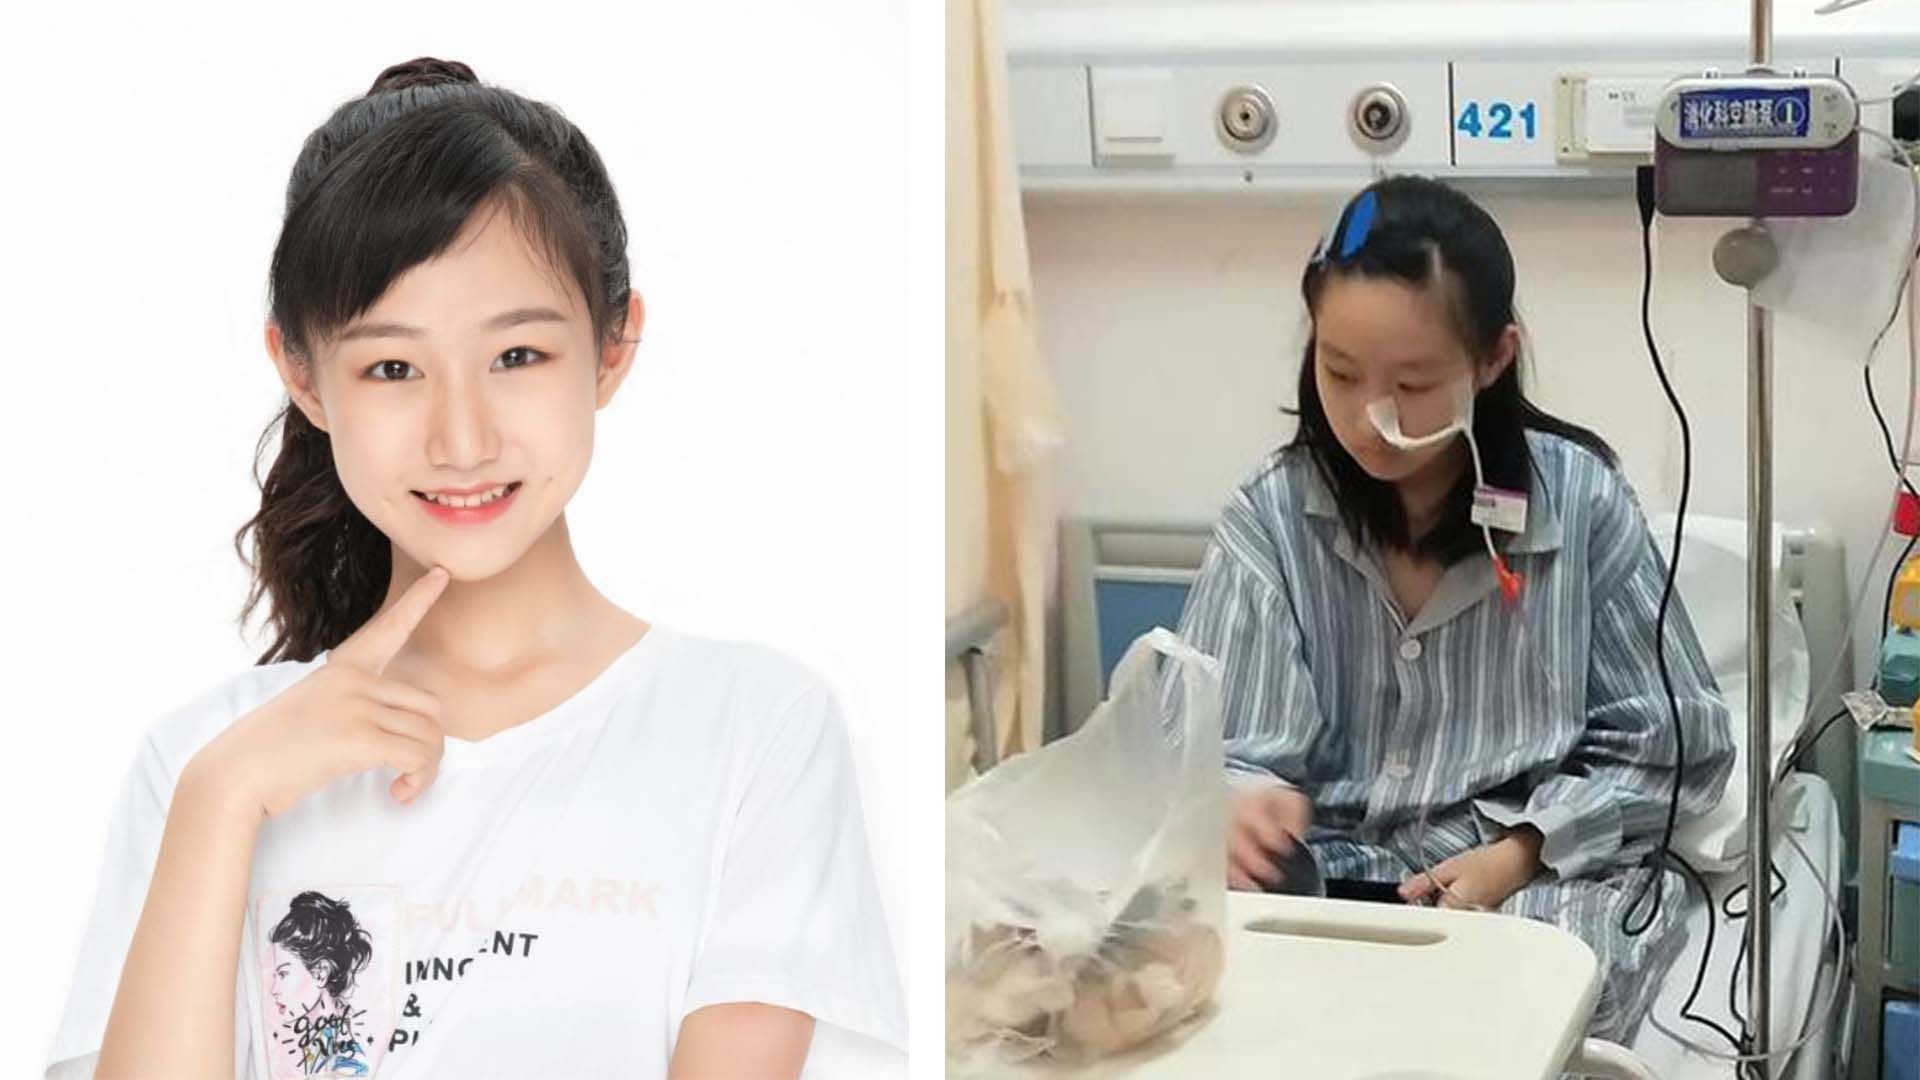 A Chinese child star and top student survives suicide attempt after being repeatedly bullied by schoolmates jealous of her fame, according to her mother. Photo: Handout